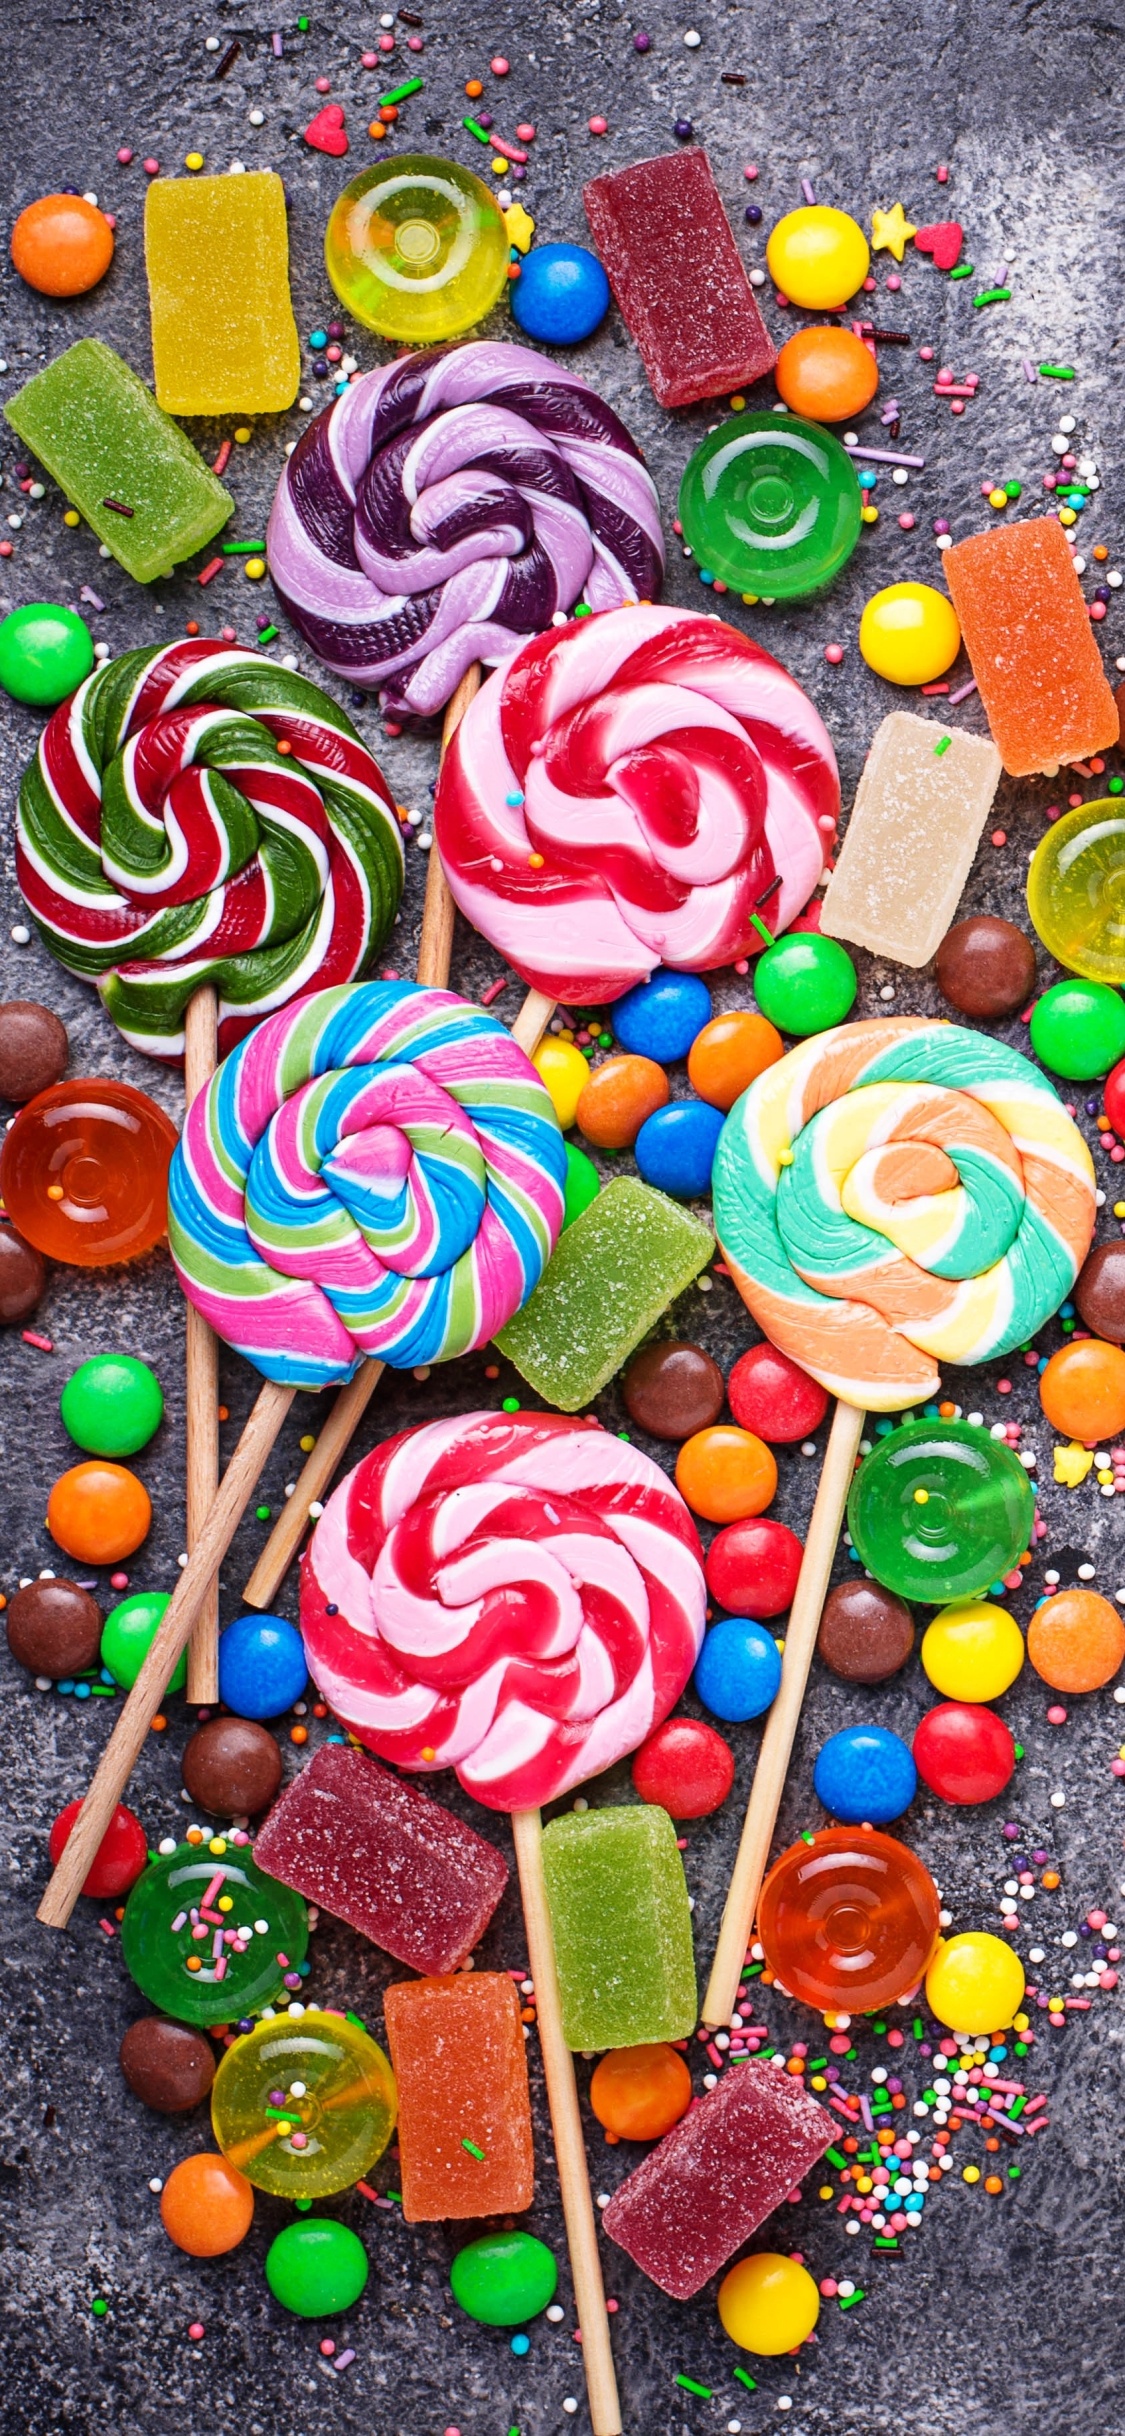 Candy-filled delight, Sweet and satisfying, Perfect for food lovers, Tempting indulgence, 1130x2440 HD Handy